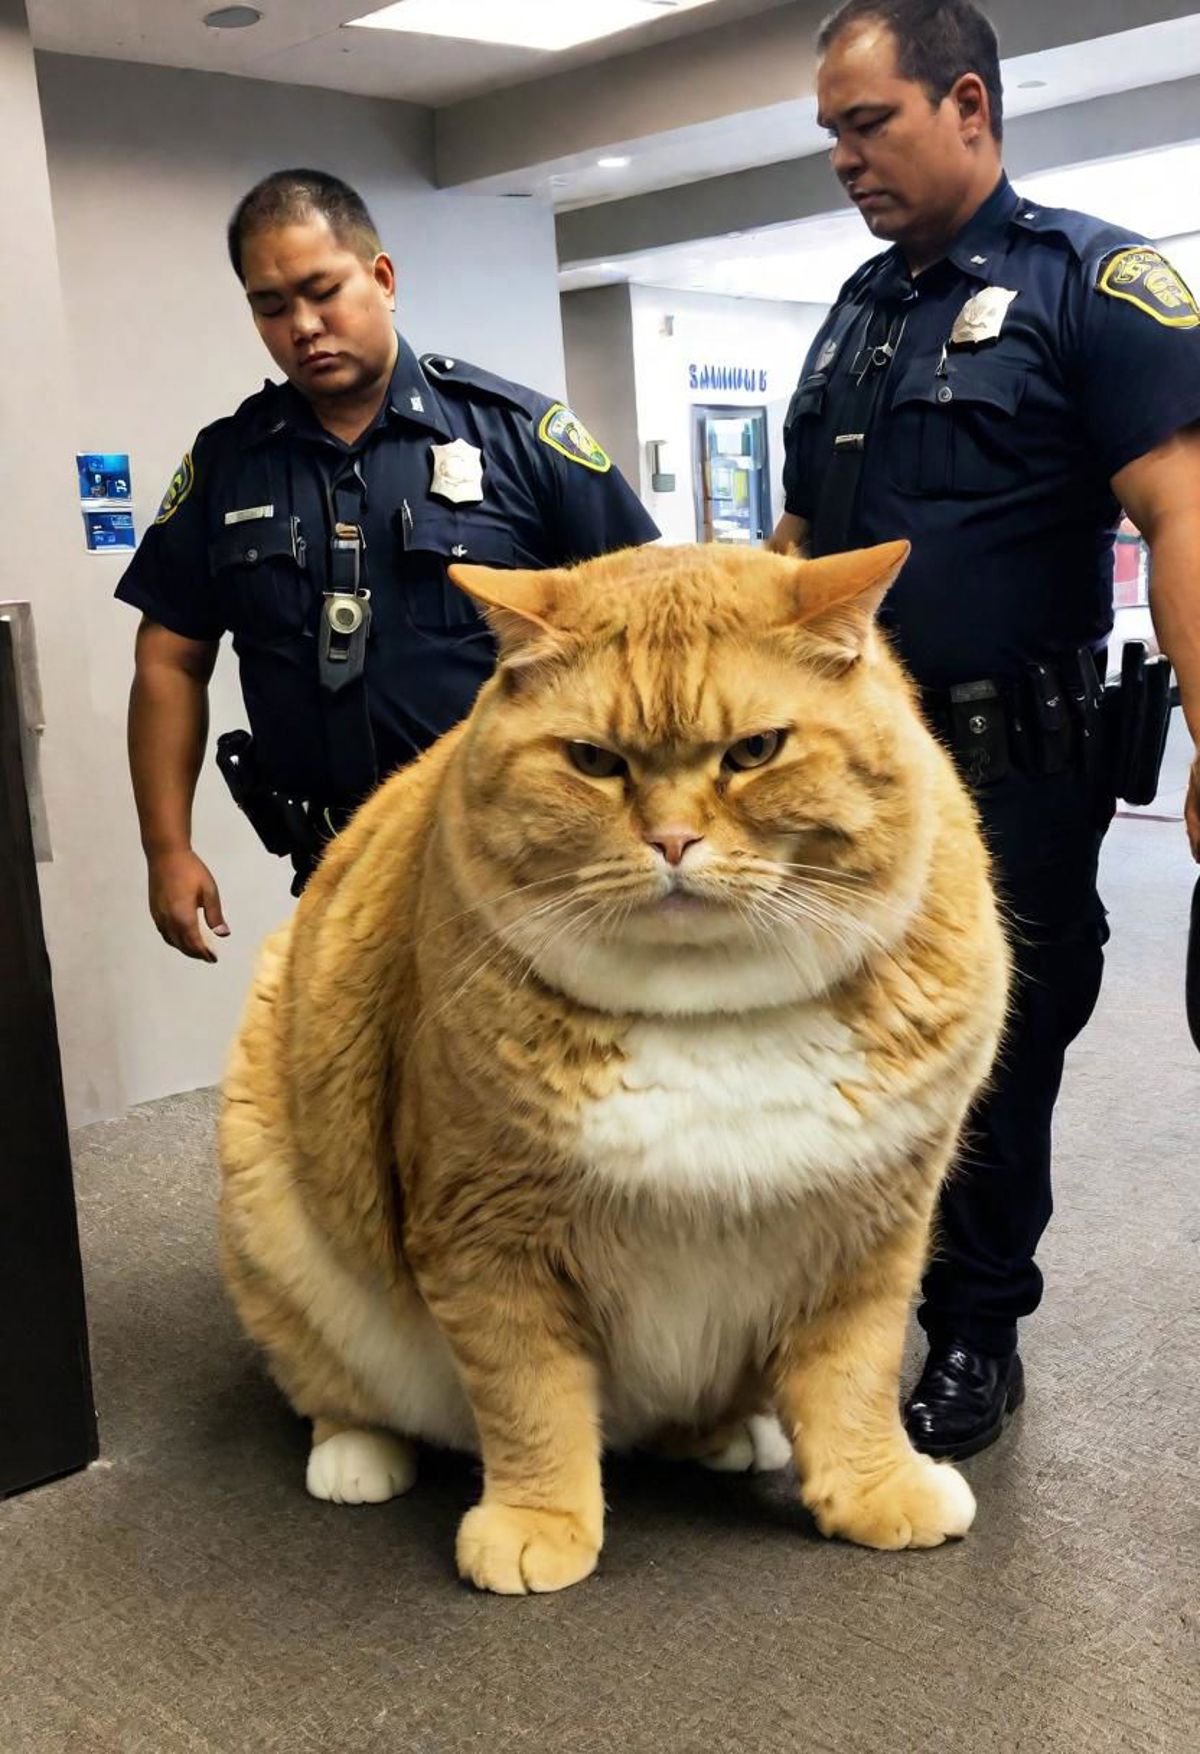 A large orange cat sitting between two police officers.